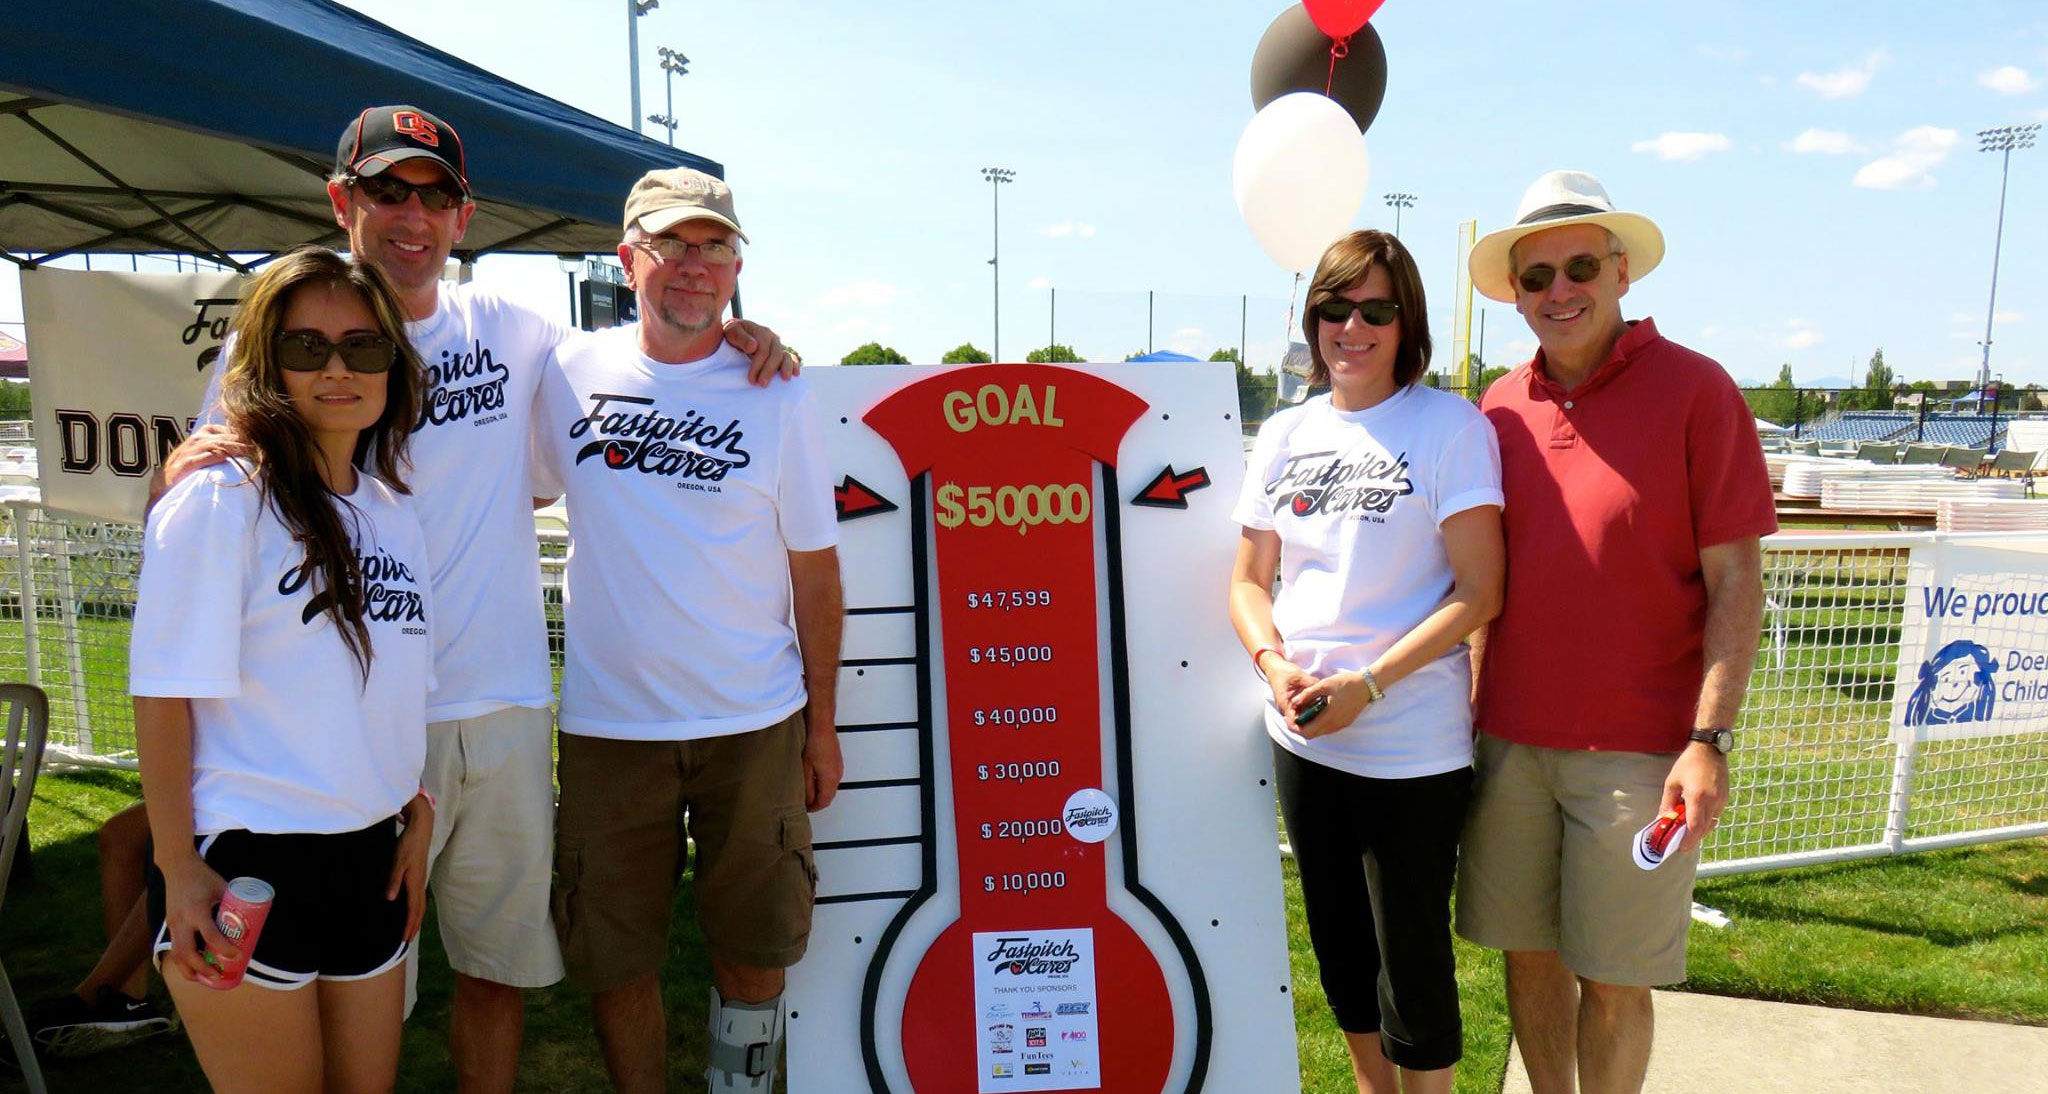 Volunteers from Fast Pitch Cares show their fundraising thermometer graphic